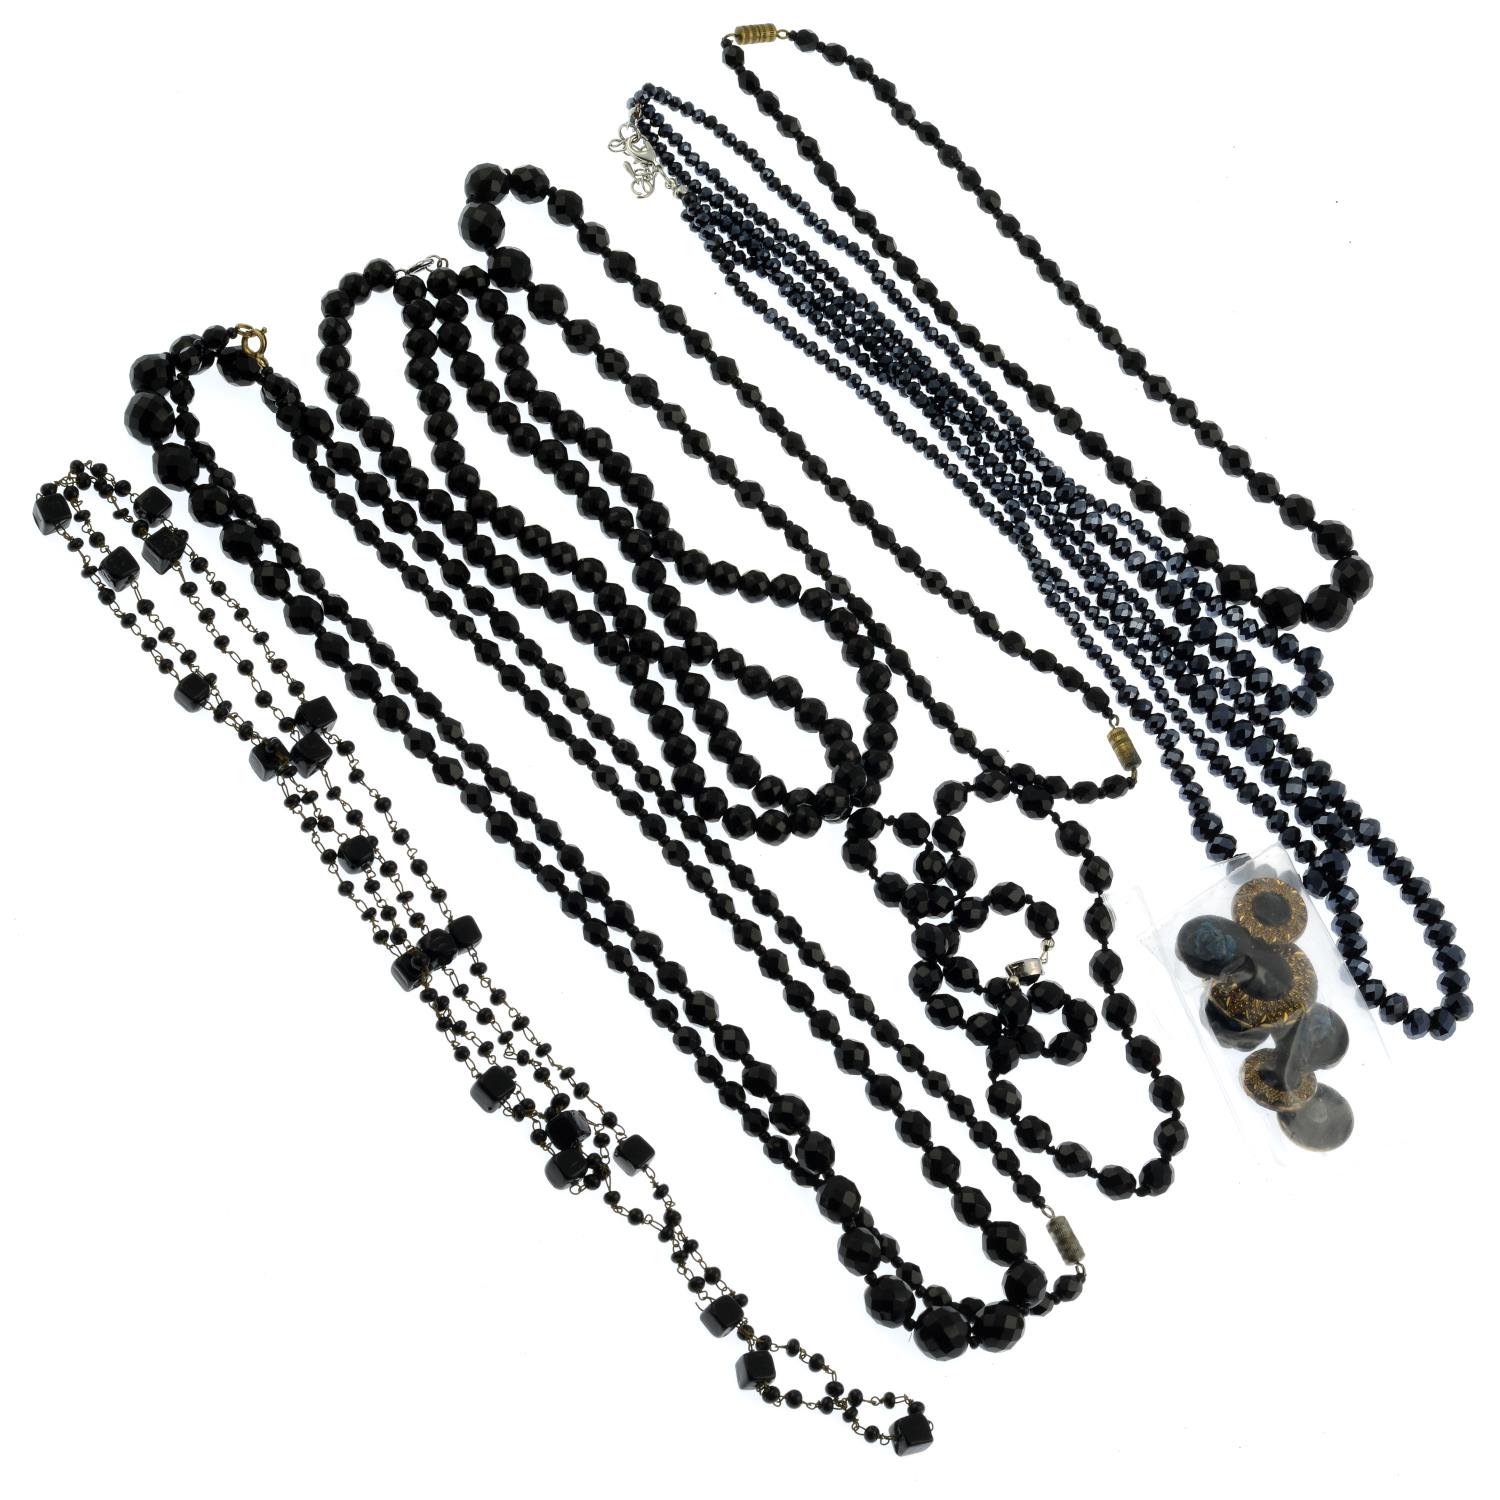 A selection of black glass bead necklaces and buttons, - Image 2 of 2